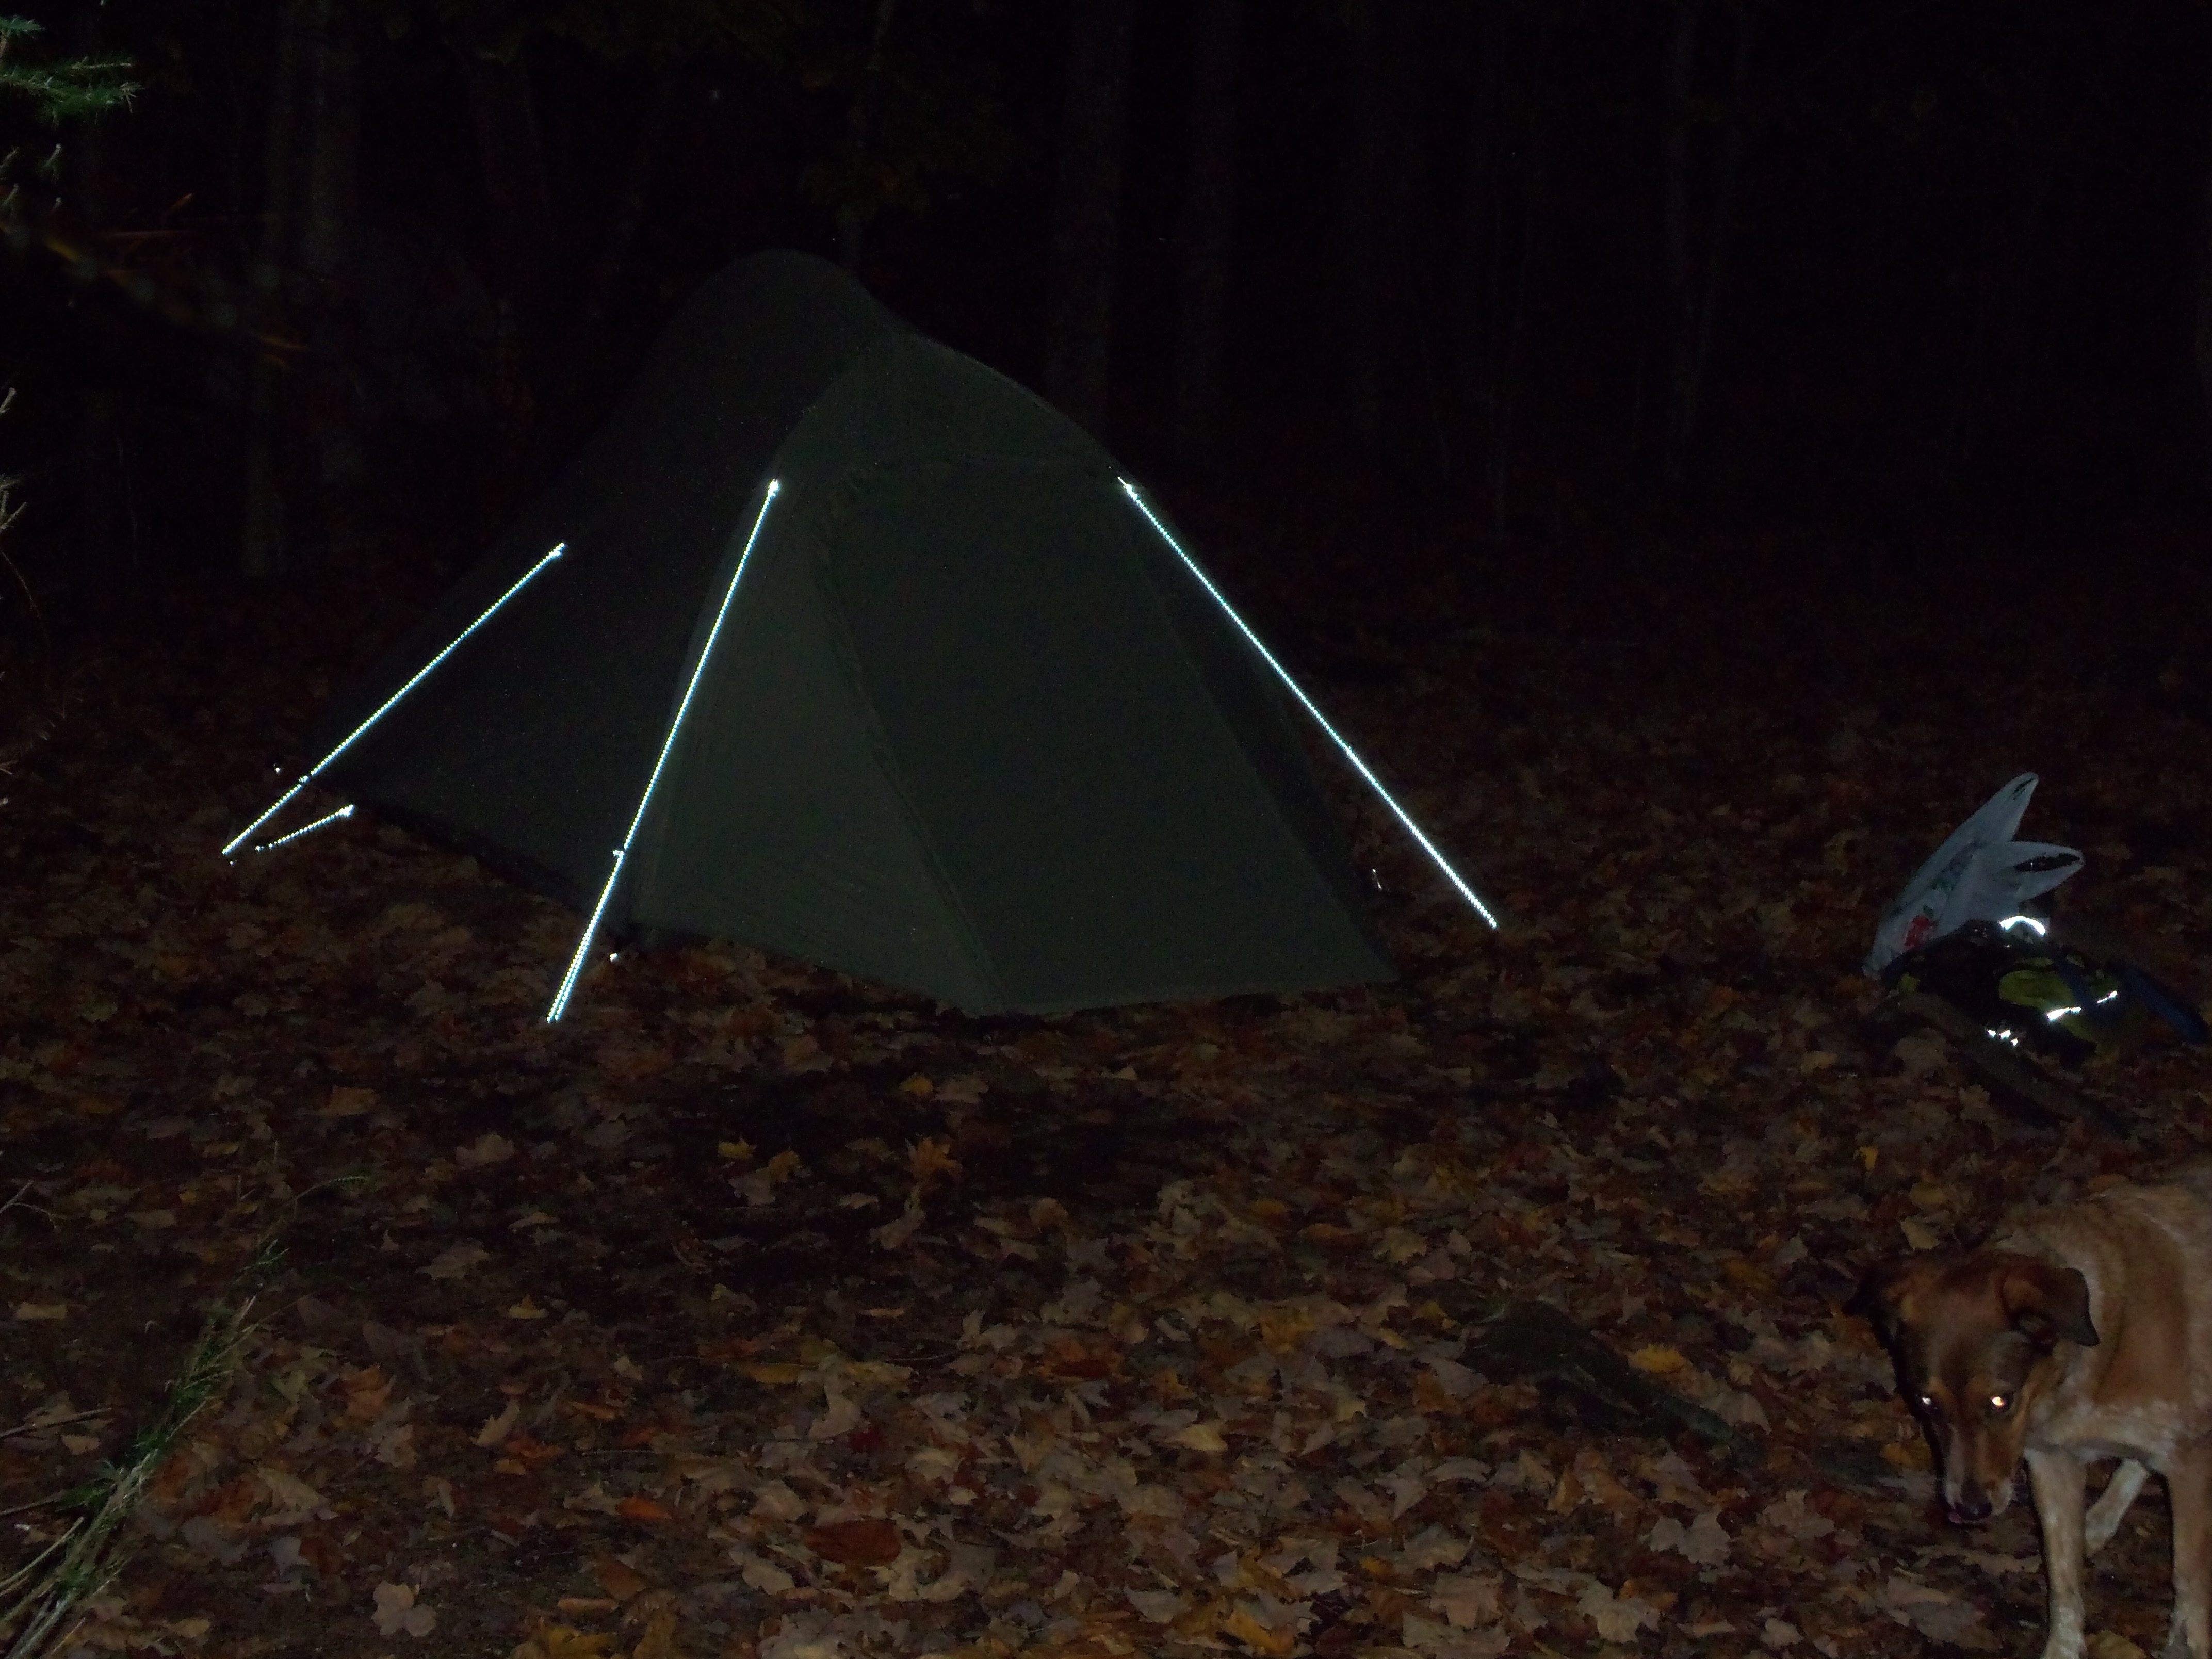 Big Agnes SL2 Seedhouse tent at night